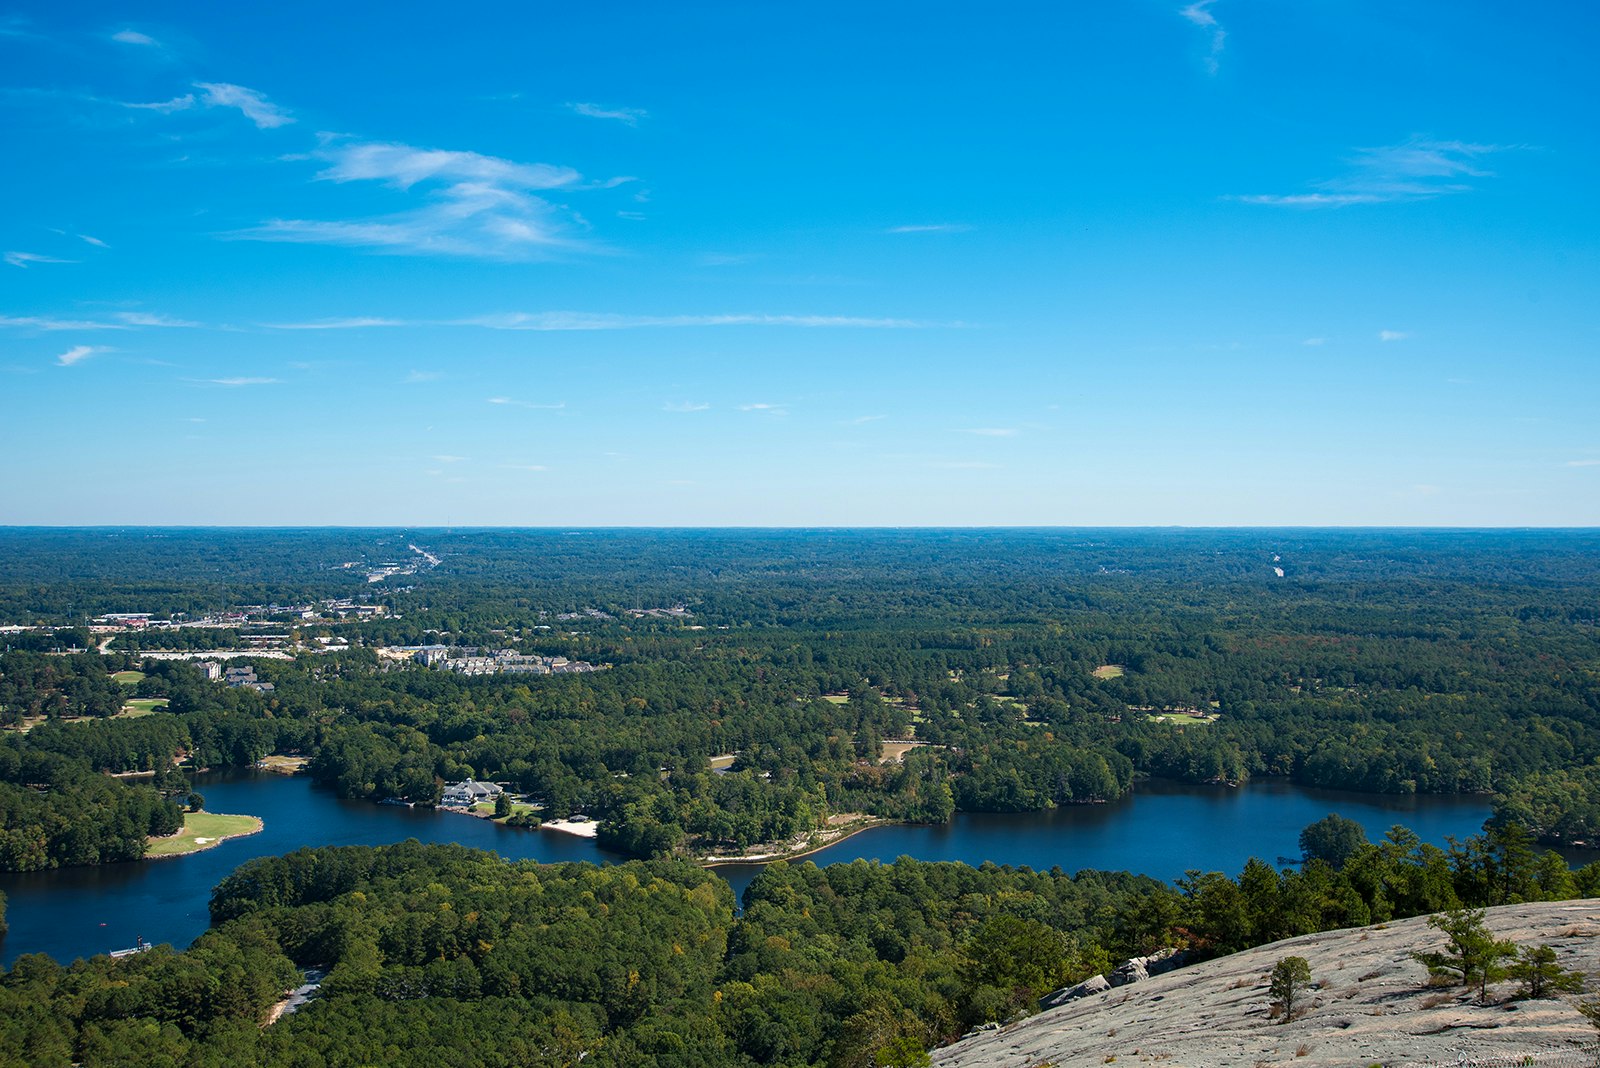 View on a clear, sunny day of the green trees and large blue lake at the foot of Stone Mountain, Georgia